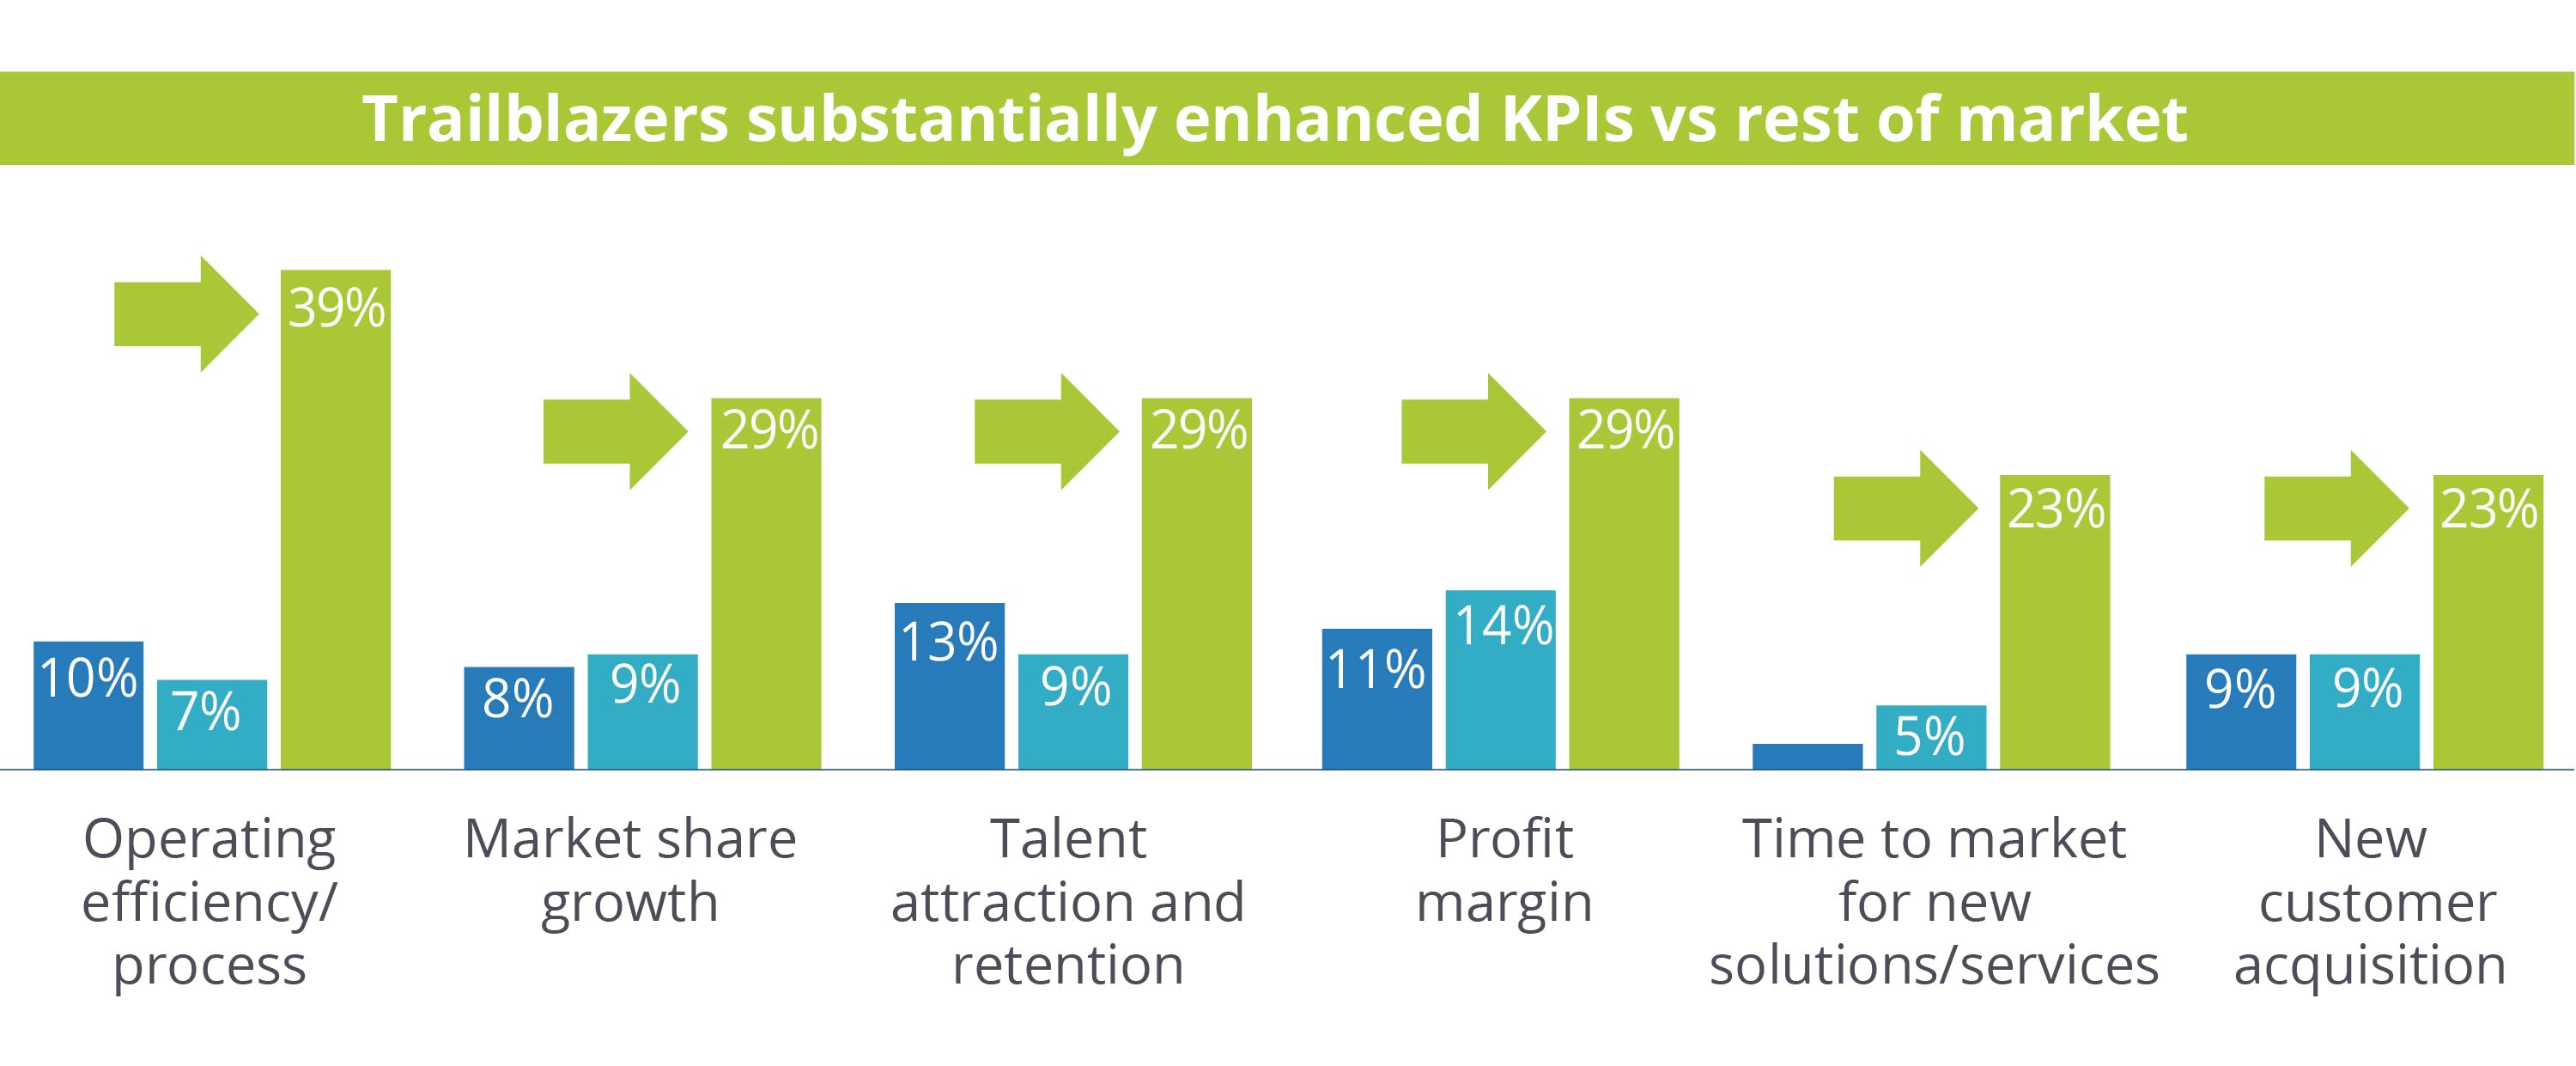 An infographic indicating how trailblazers substantially enhanced KPIs vs the rest of the market